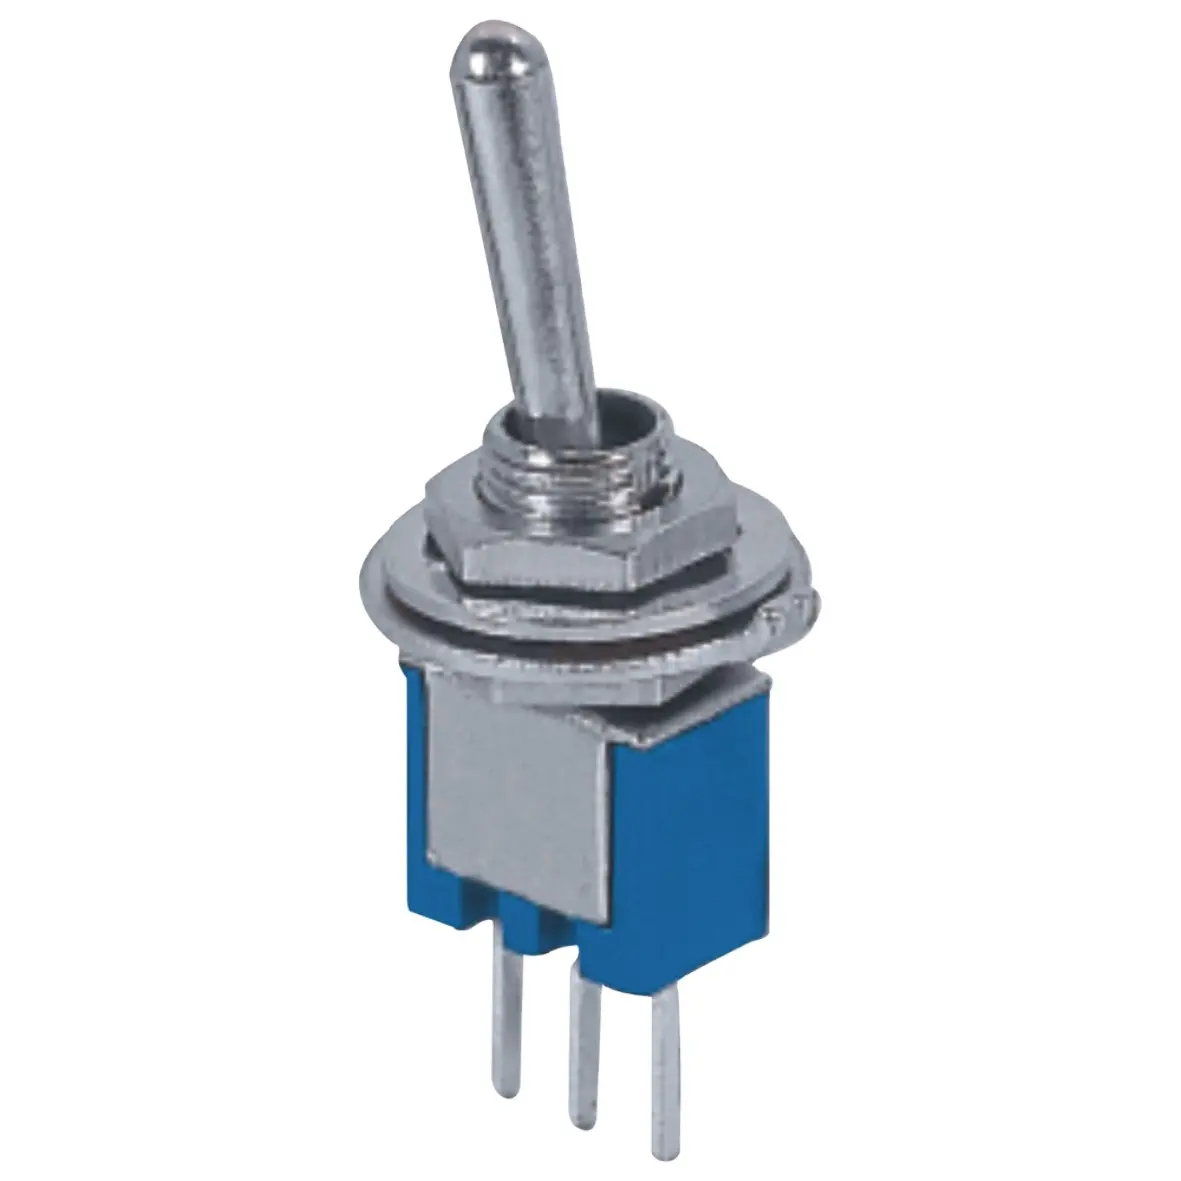 SMTS-102-A2 1.5A 250V PC Terminal ON-ON 3 Pin Sub-Miniature Toggle Switch